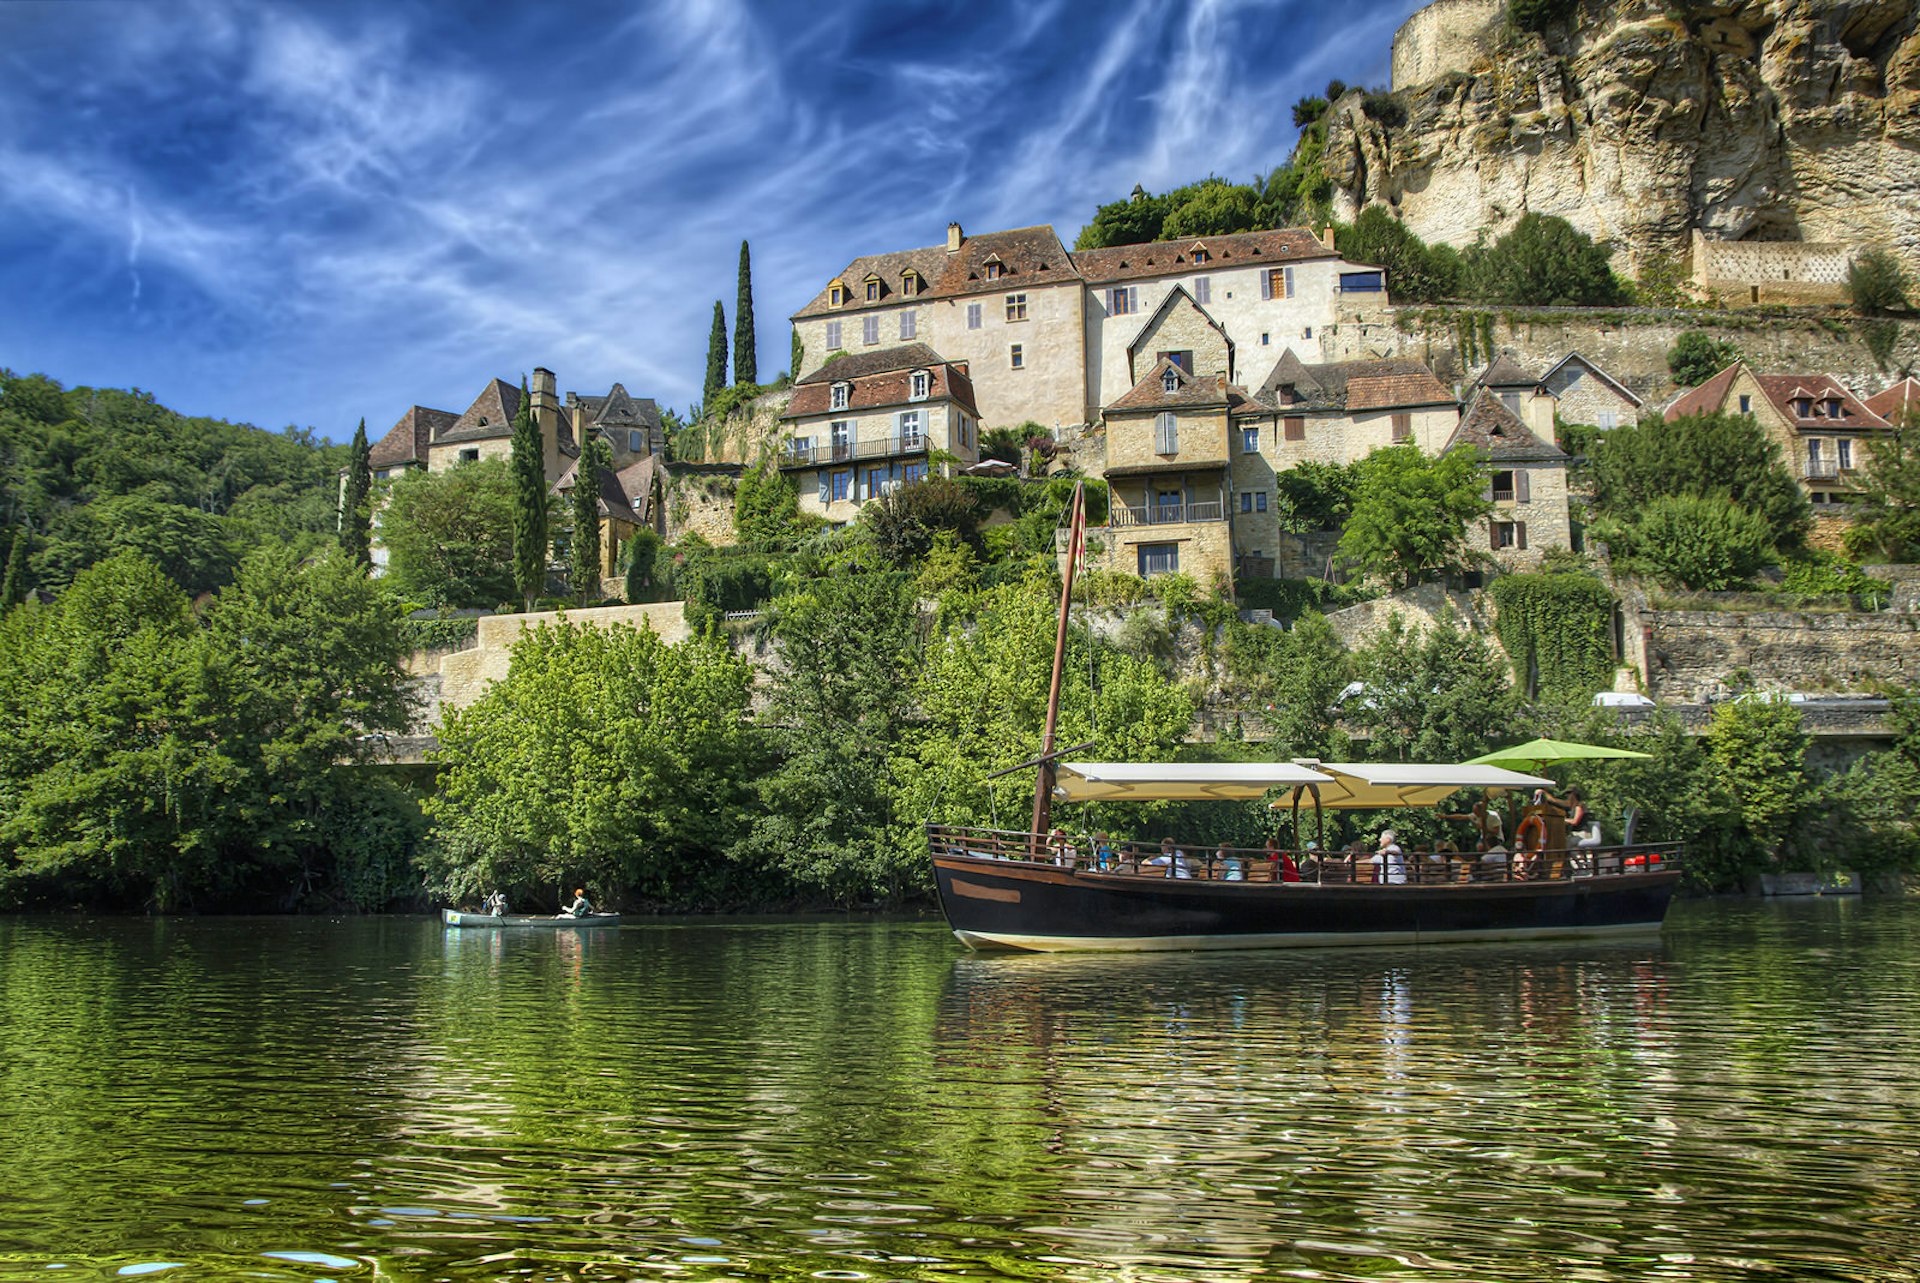 Boating on the Dordogne River at the Château Beynac © Rolf E Staerk / Shutterstock